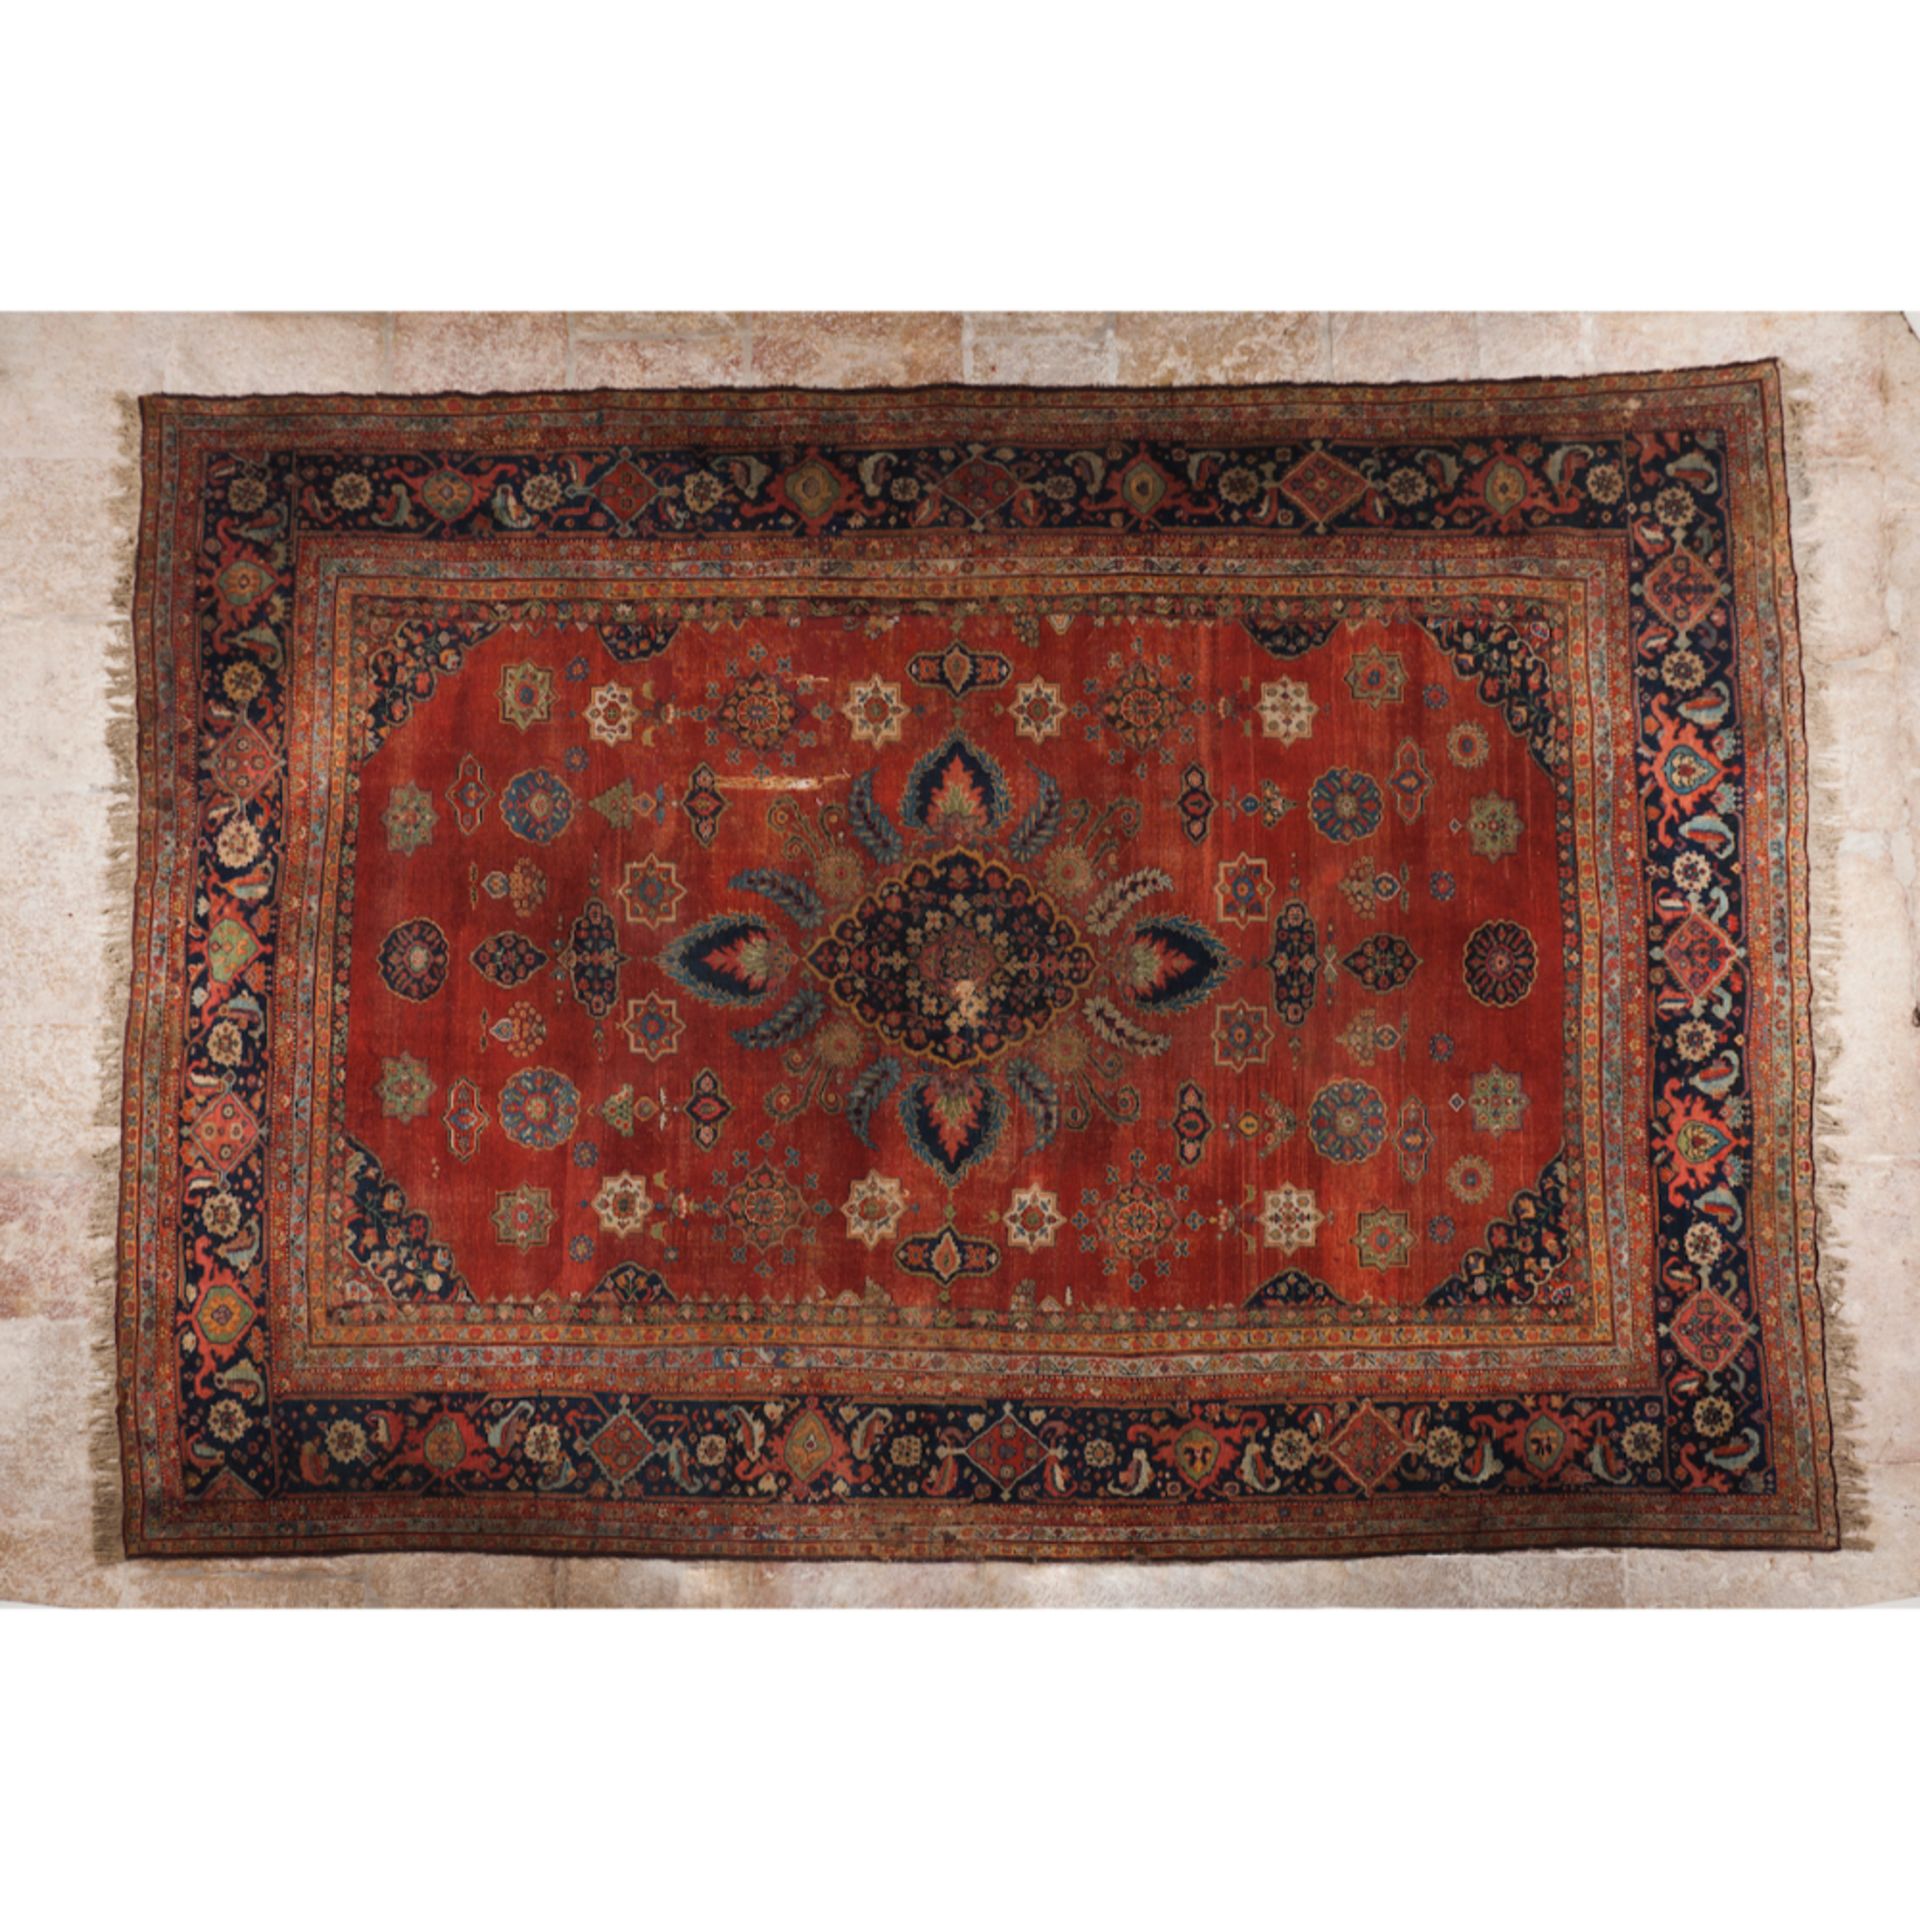 Malayer rug, IranIn wood and cotton Geometric and floral design in shades or burgundy, beige and